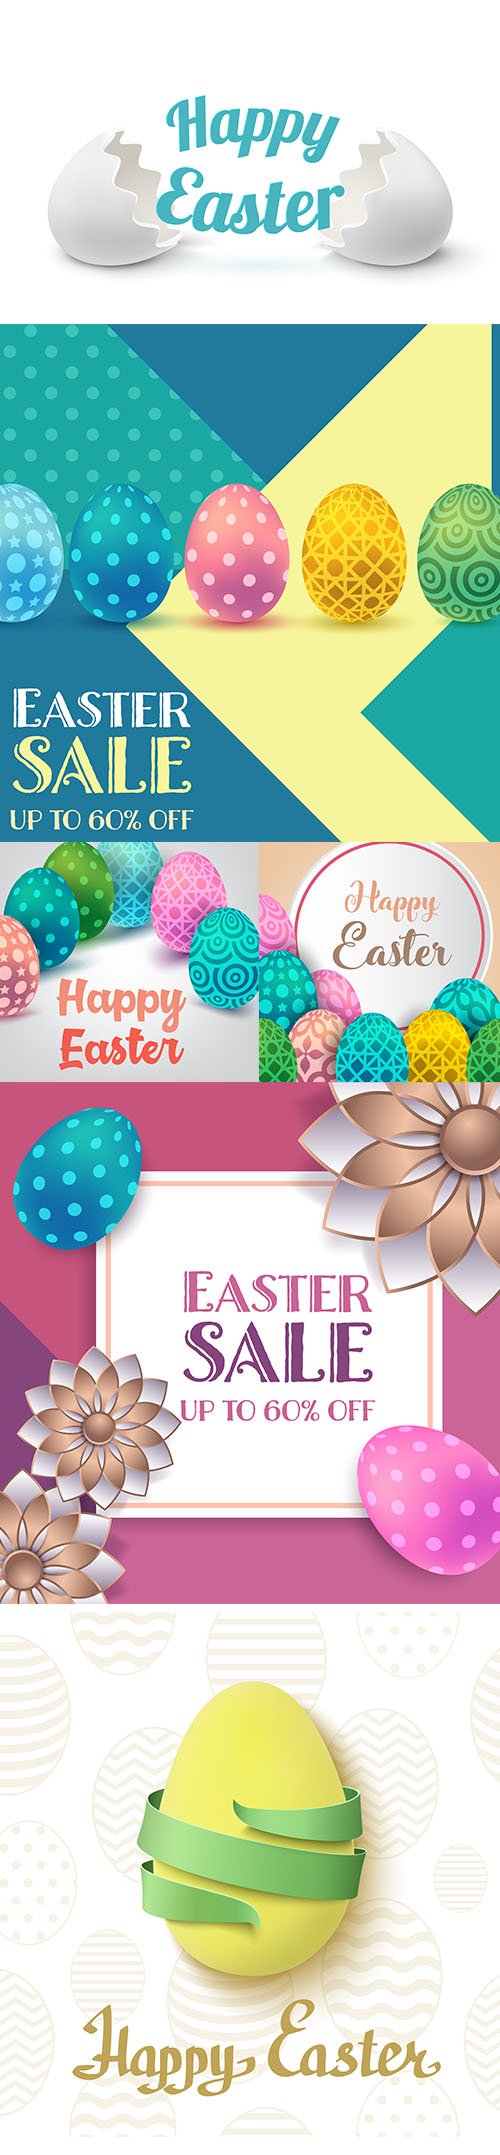 Happy Easter Background and Sale Offer Illustration